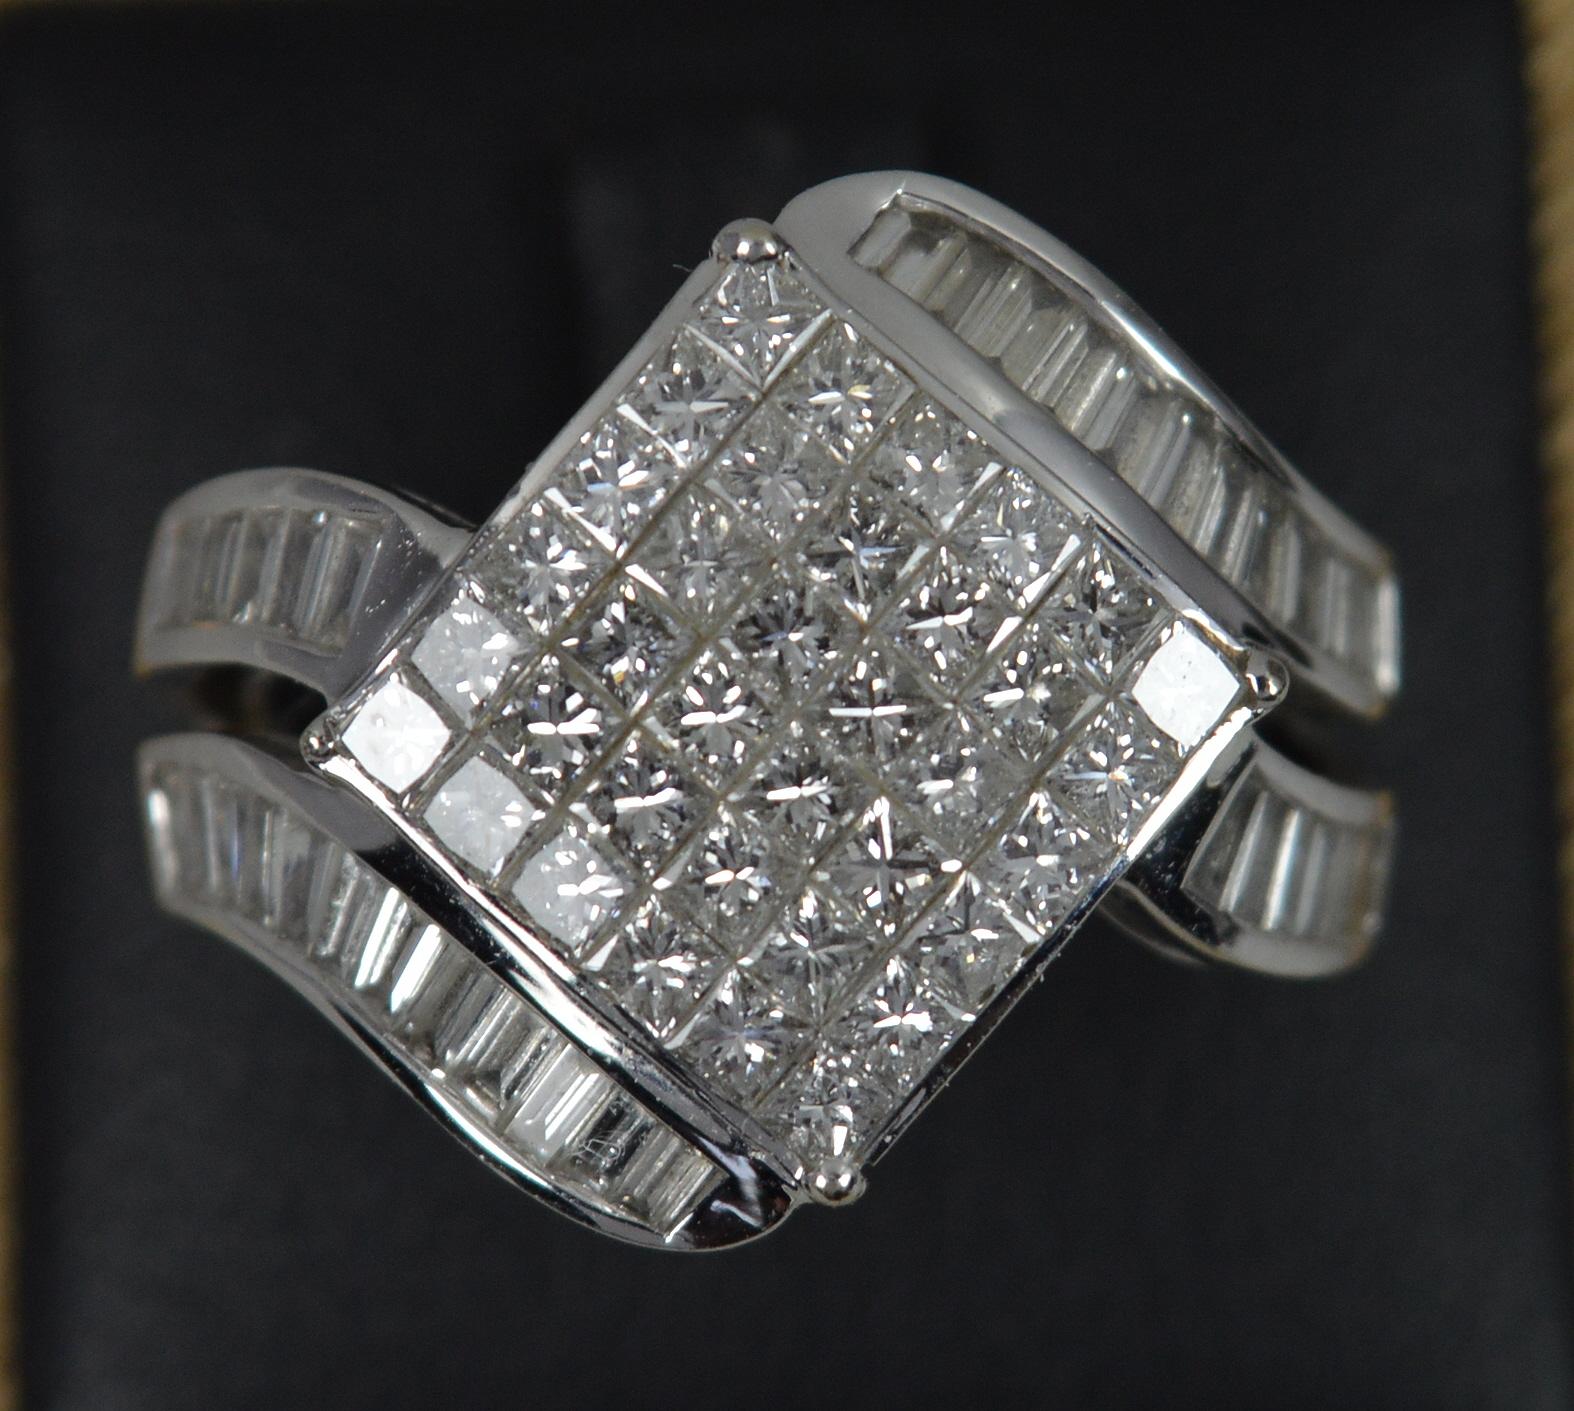 Heavy Bling 2.03 Carat Diamond and 18 Carat White Gold Cluster Ring 6